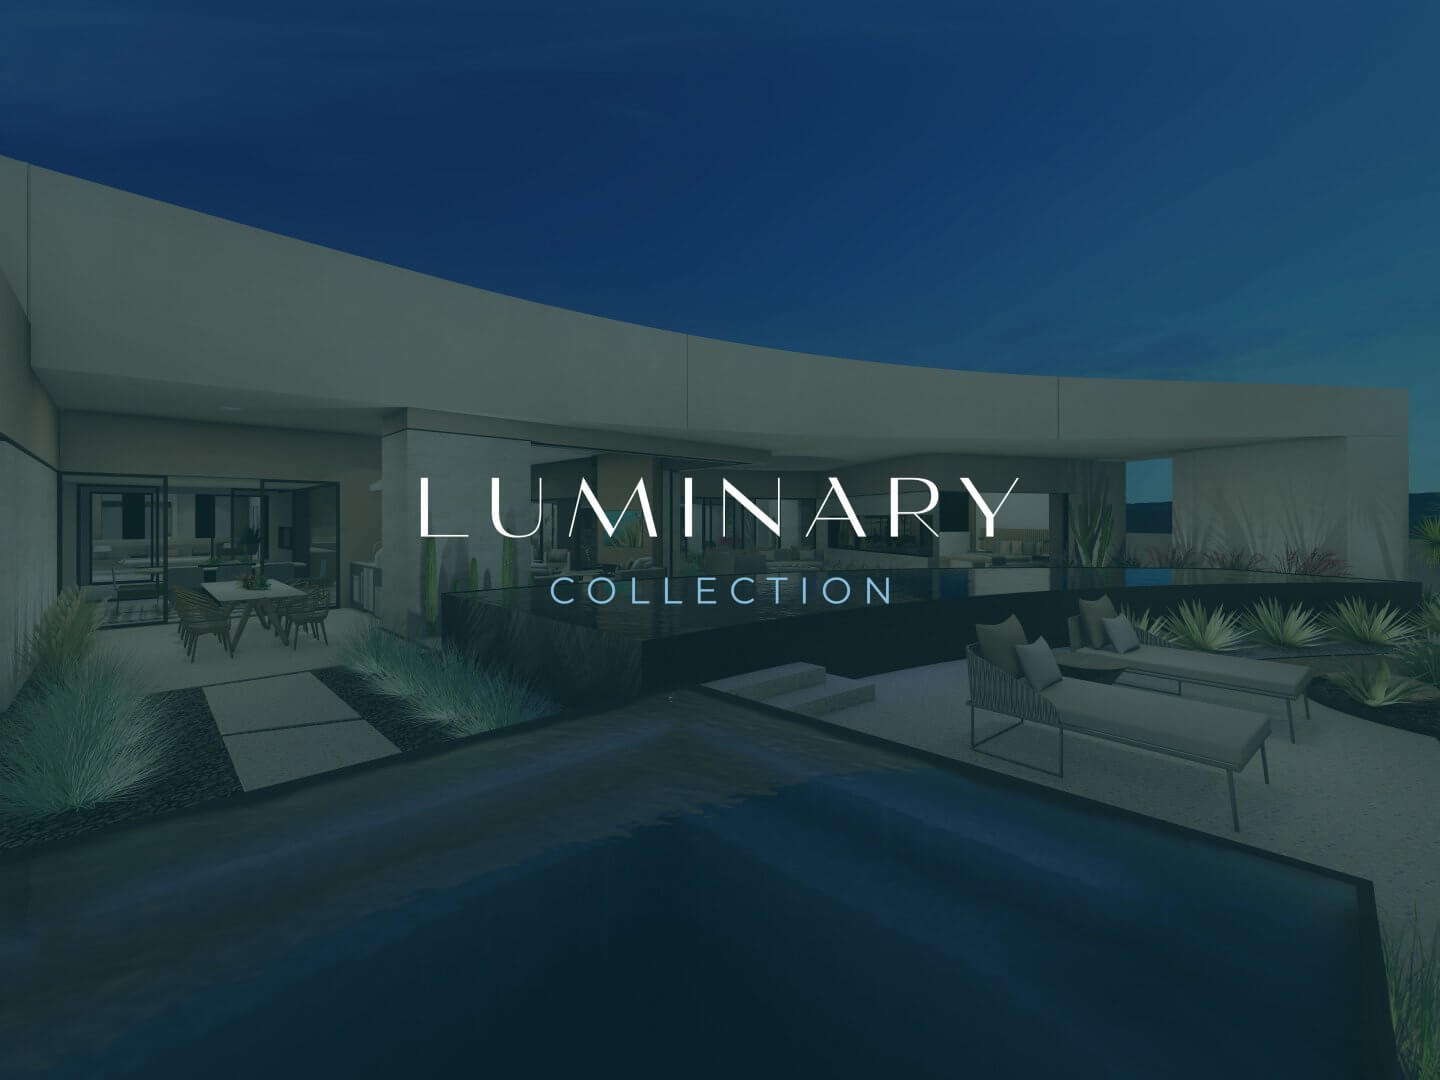 The Luminary Collection